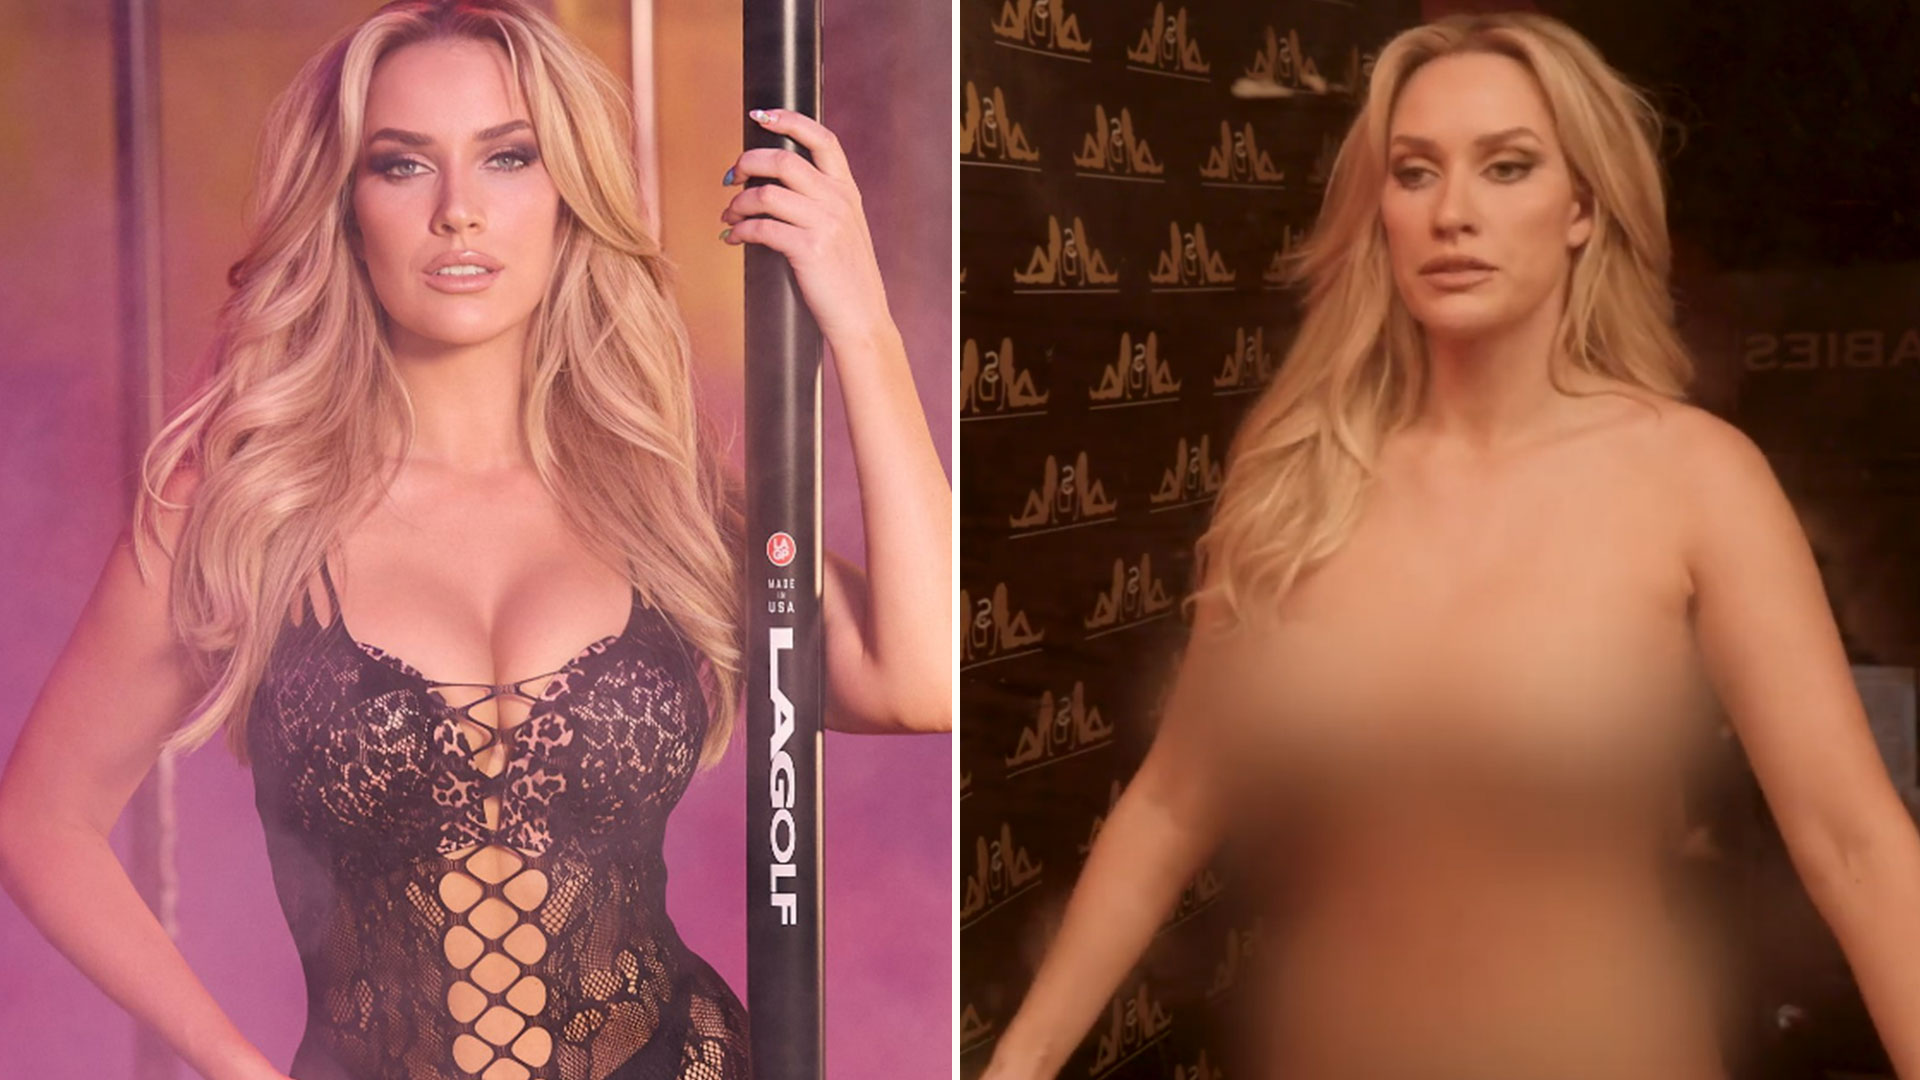 deejay excel recommends paige spiranic leaked photos pic